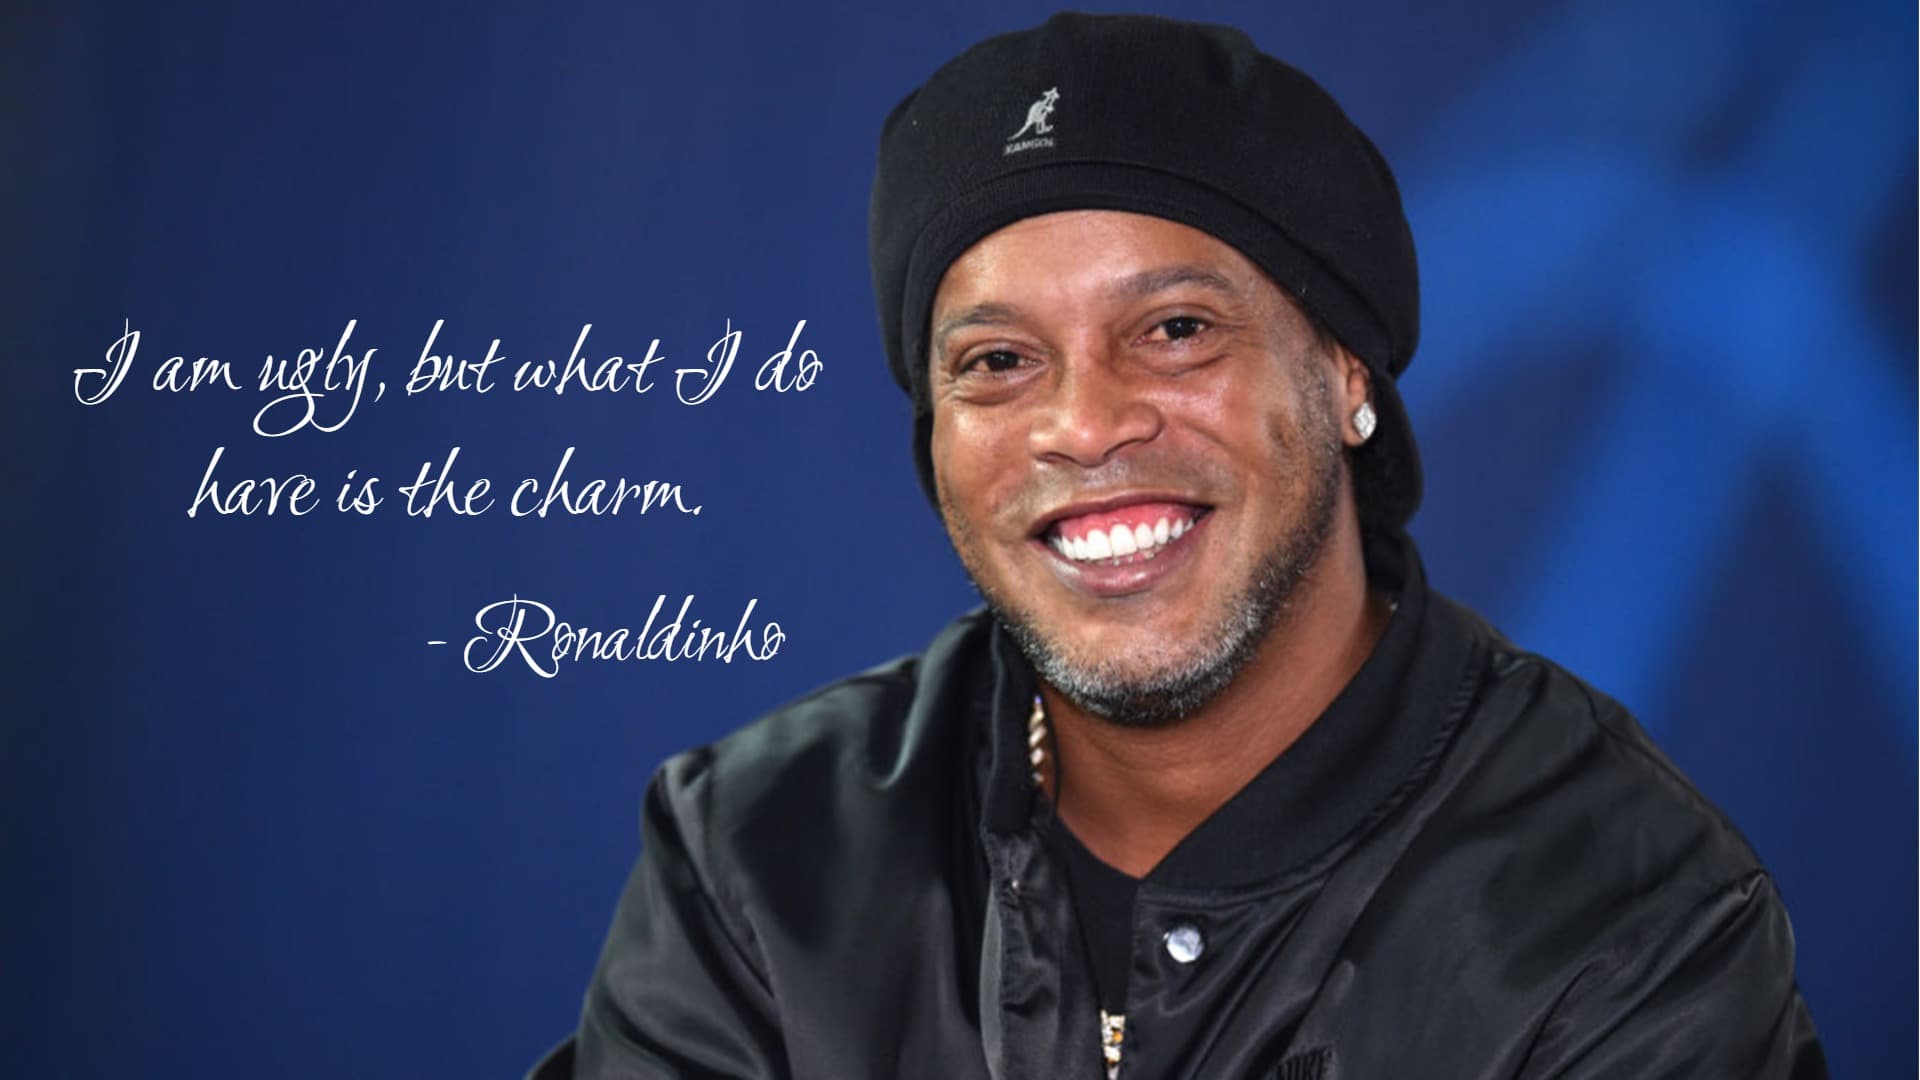 Football Quotes By Players - Ronaldinho